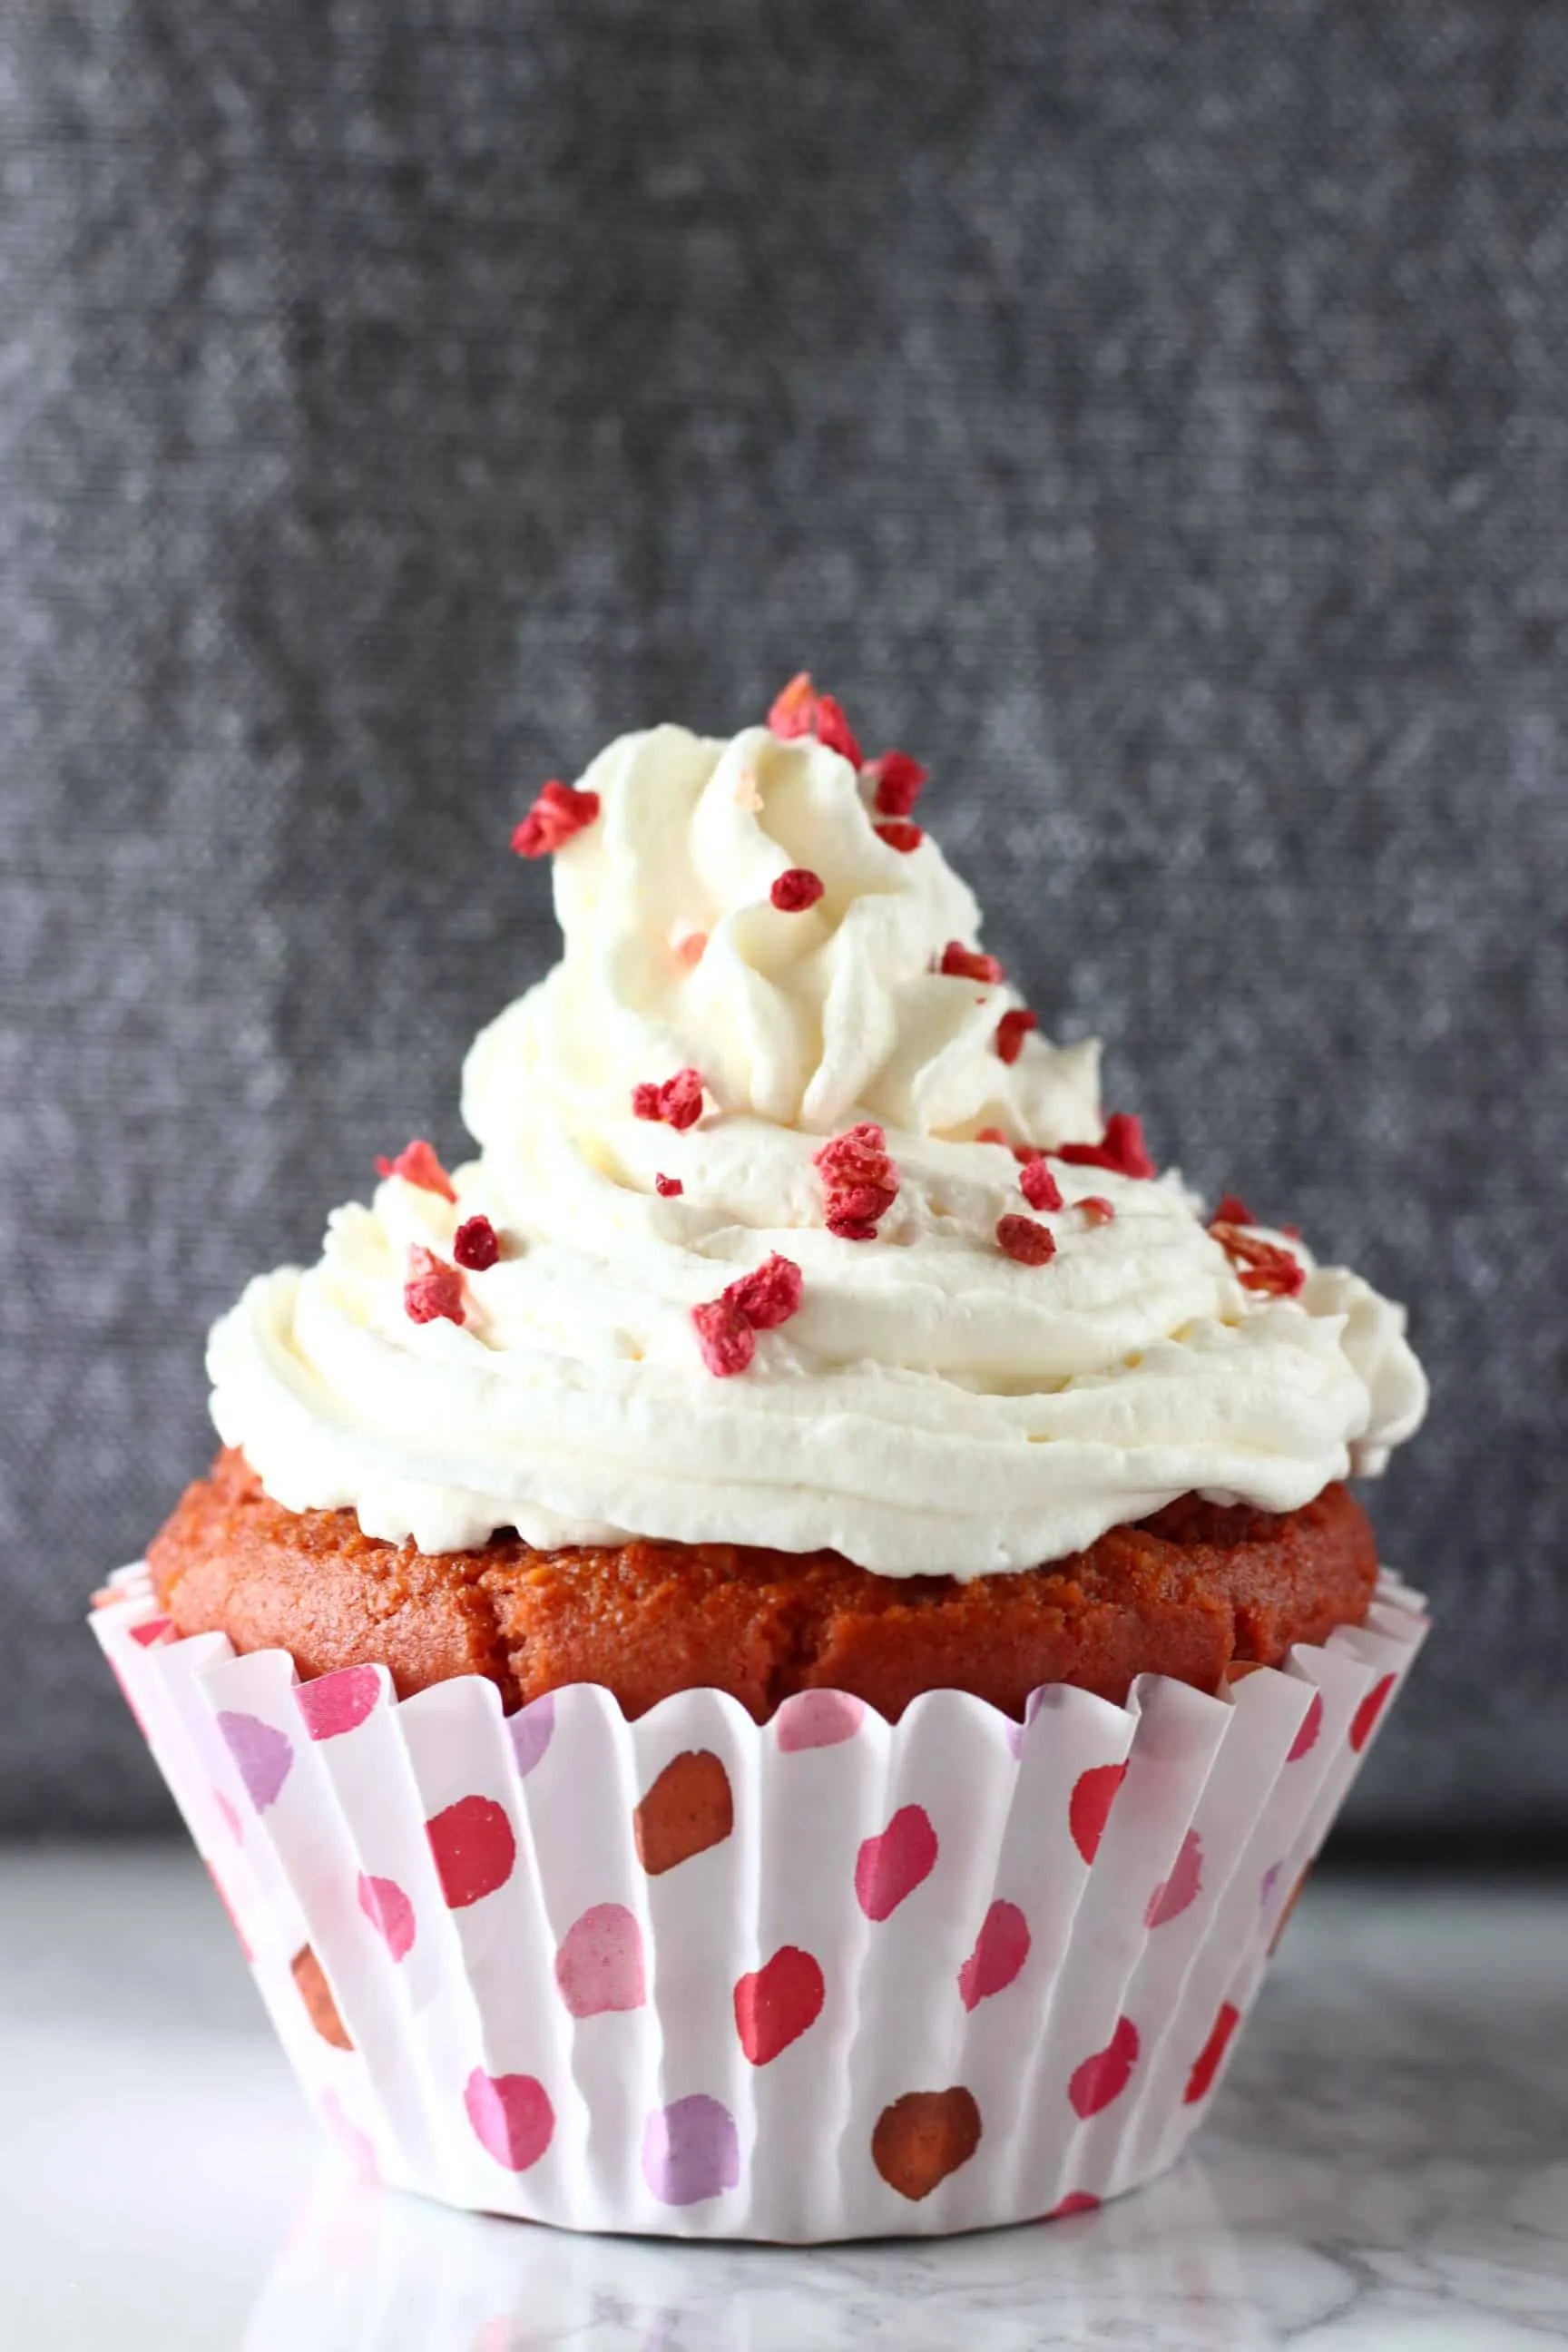 A gluten-free vegan red velvet cupcake topped with white cream cheese frosting and freeze-dried raspberries